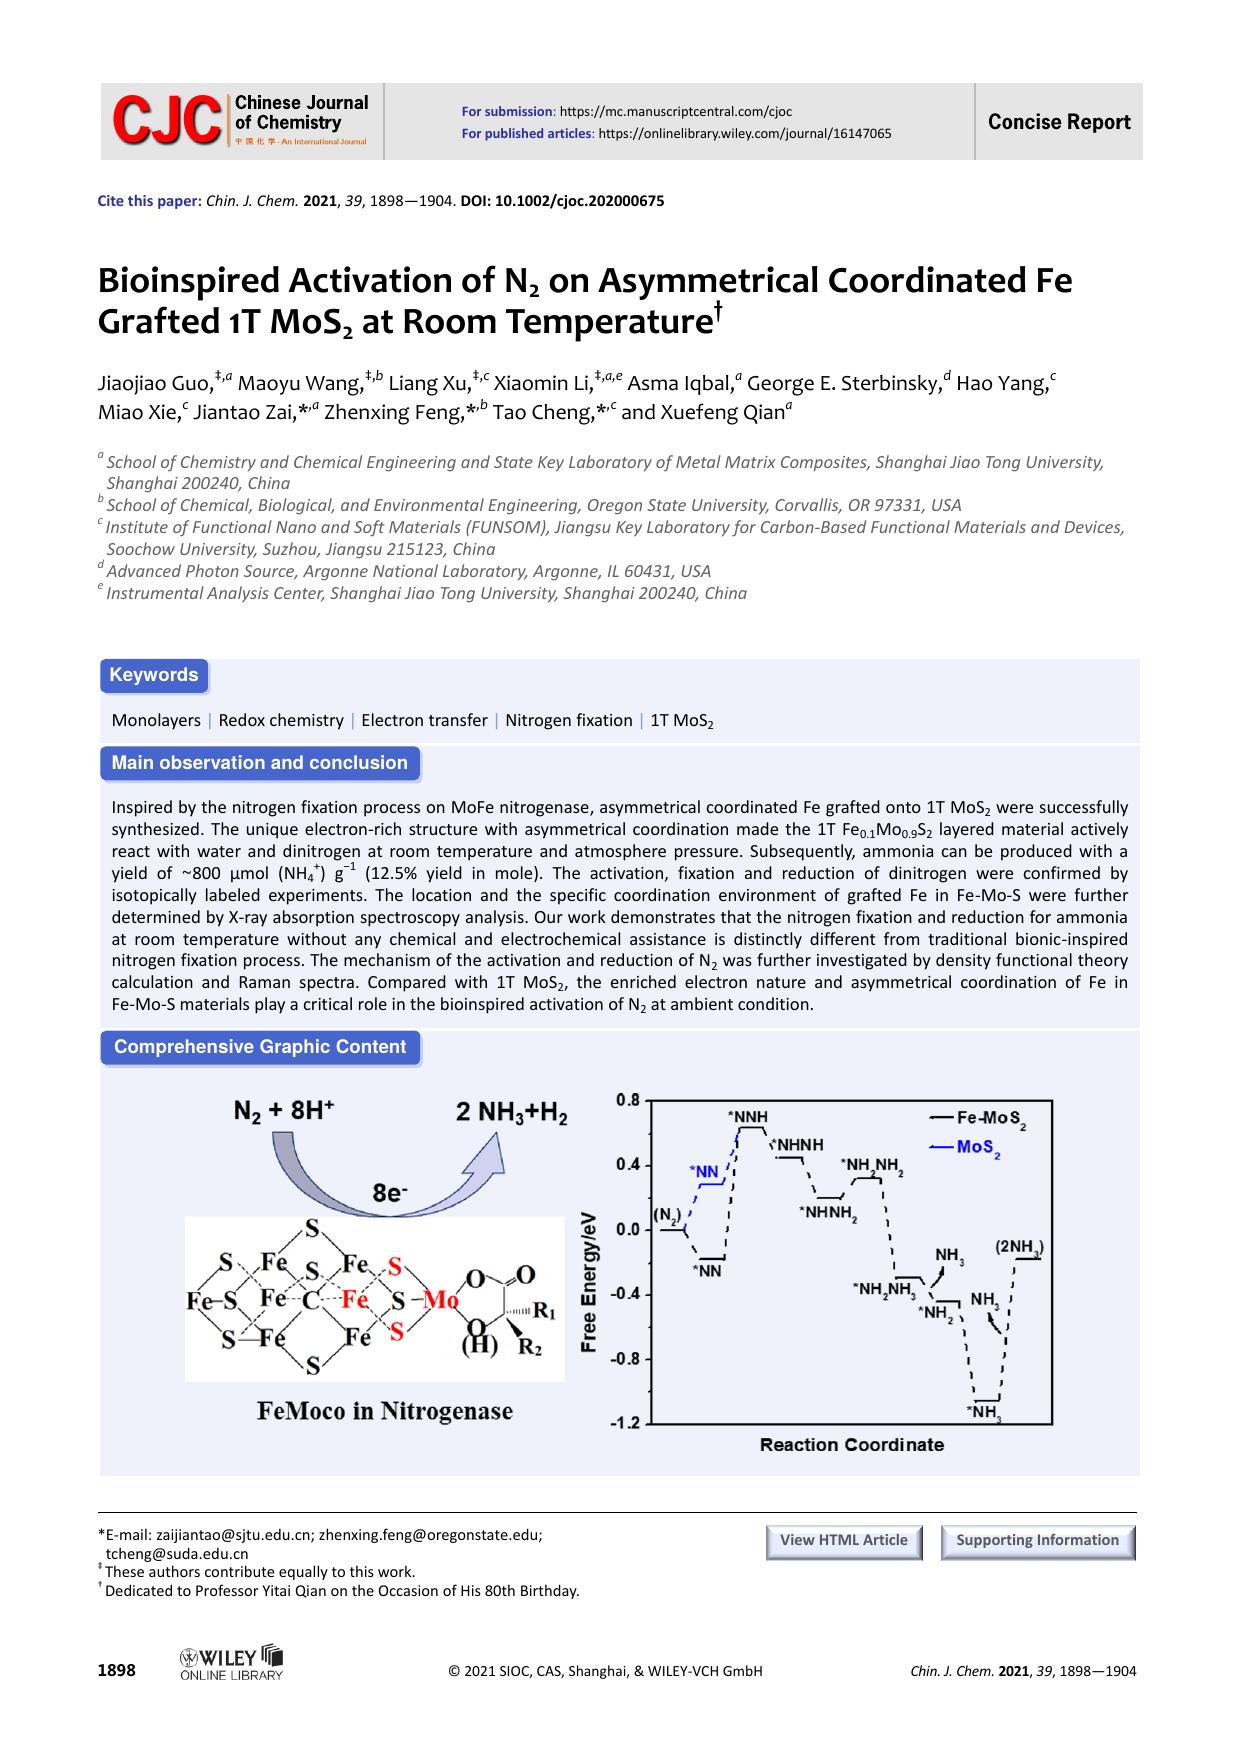 Bioinspired Activation of N2 on Asymmetrical Coordinated Fe grafted 1T MoS2 at Room Temperature by 王锐玲